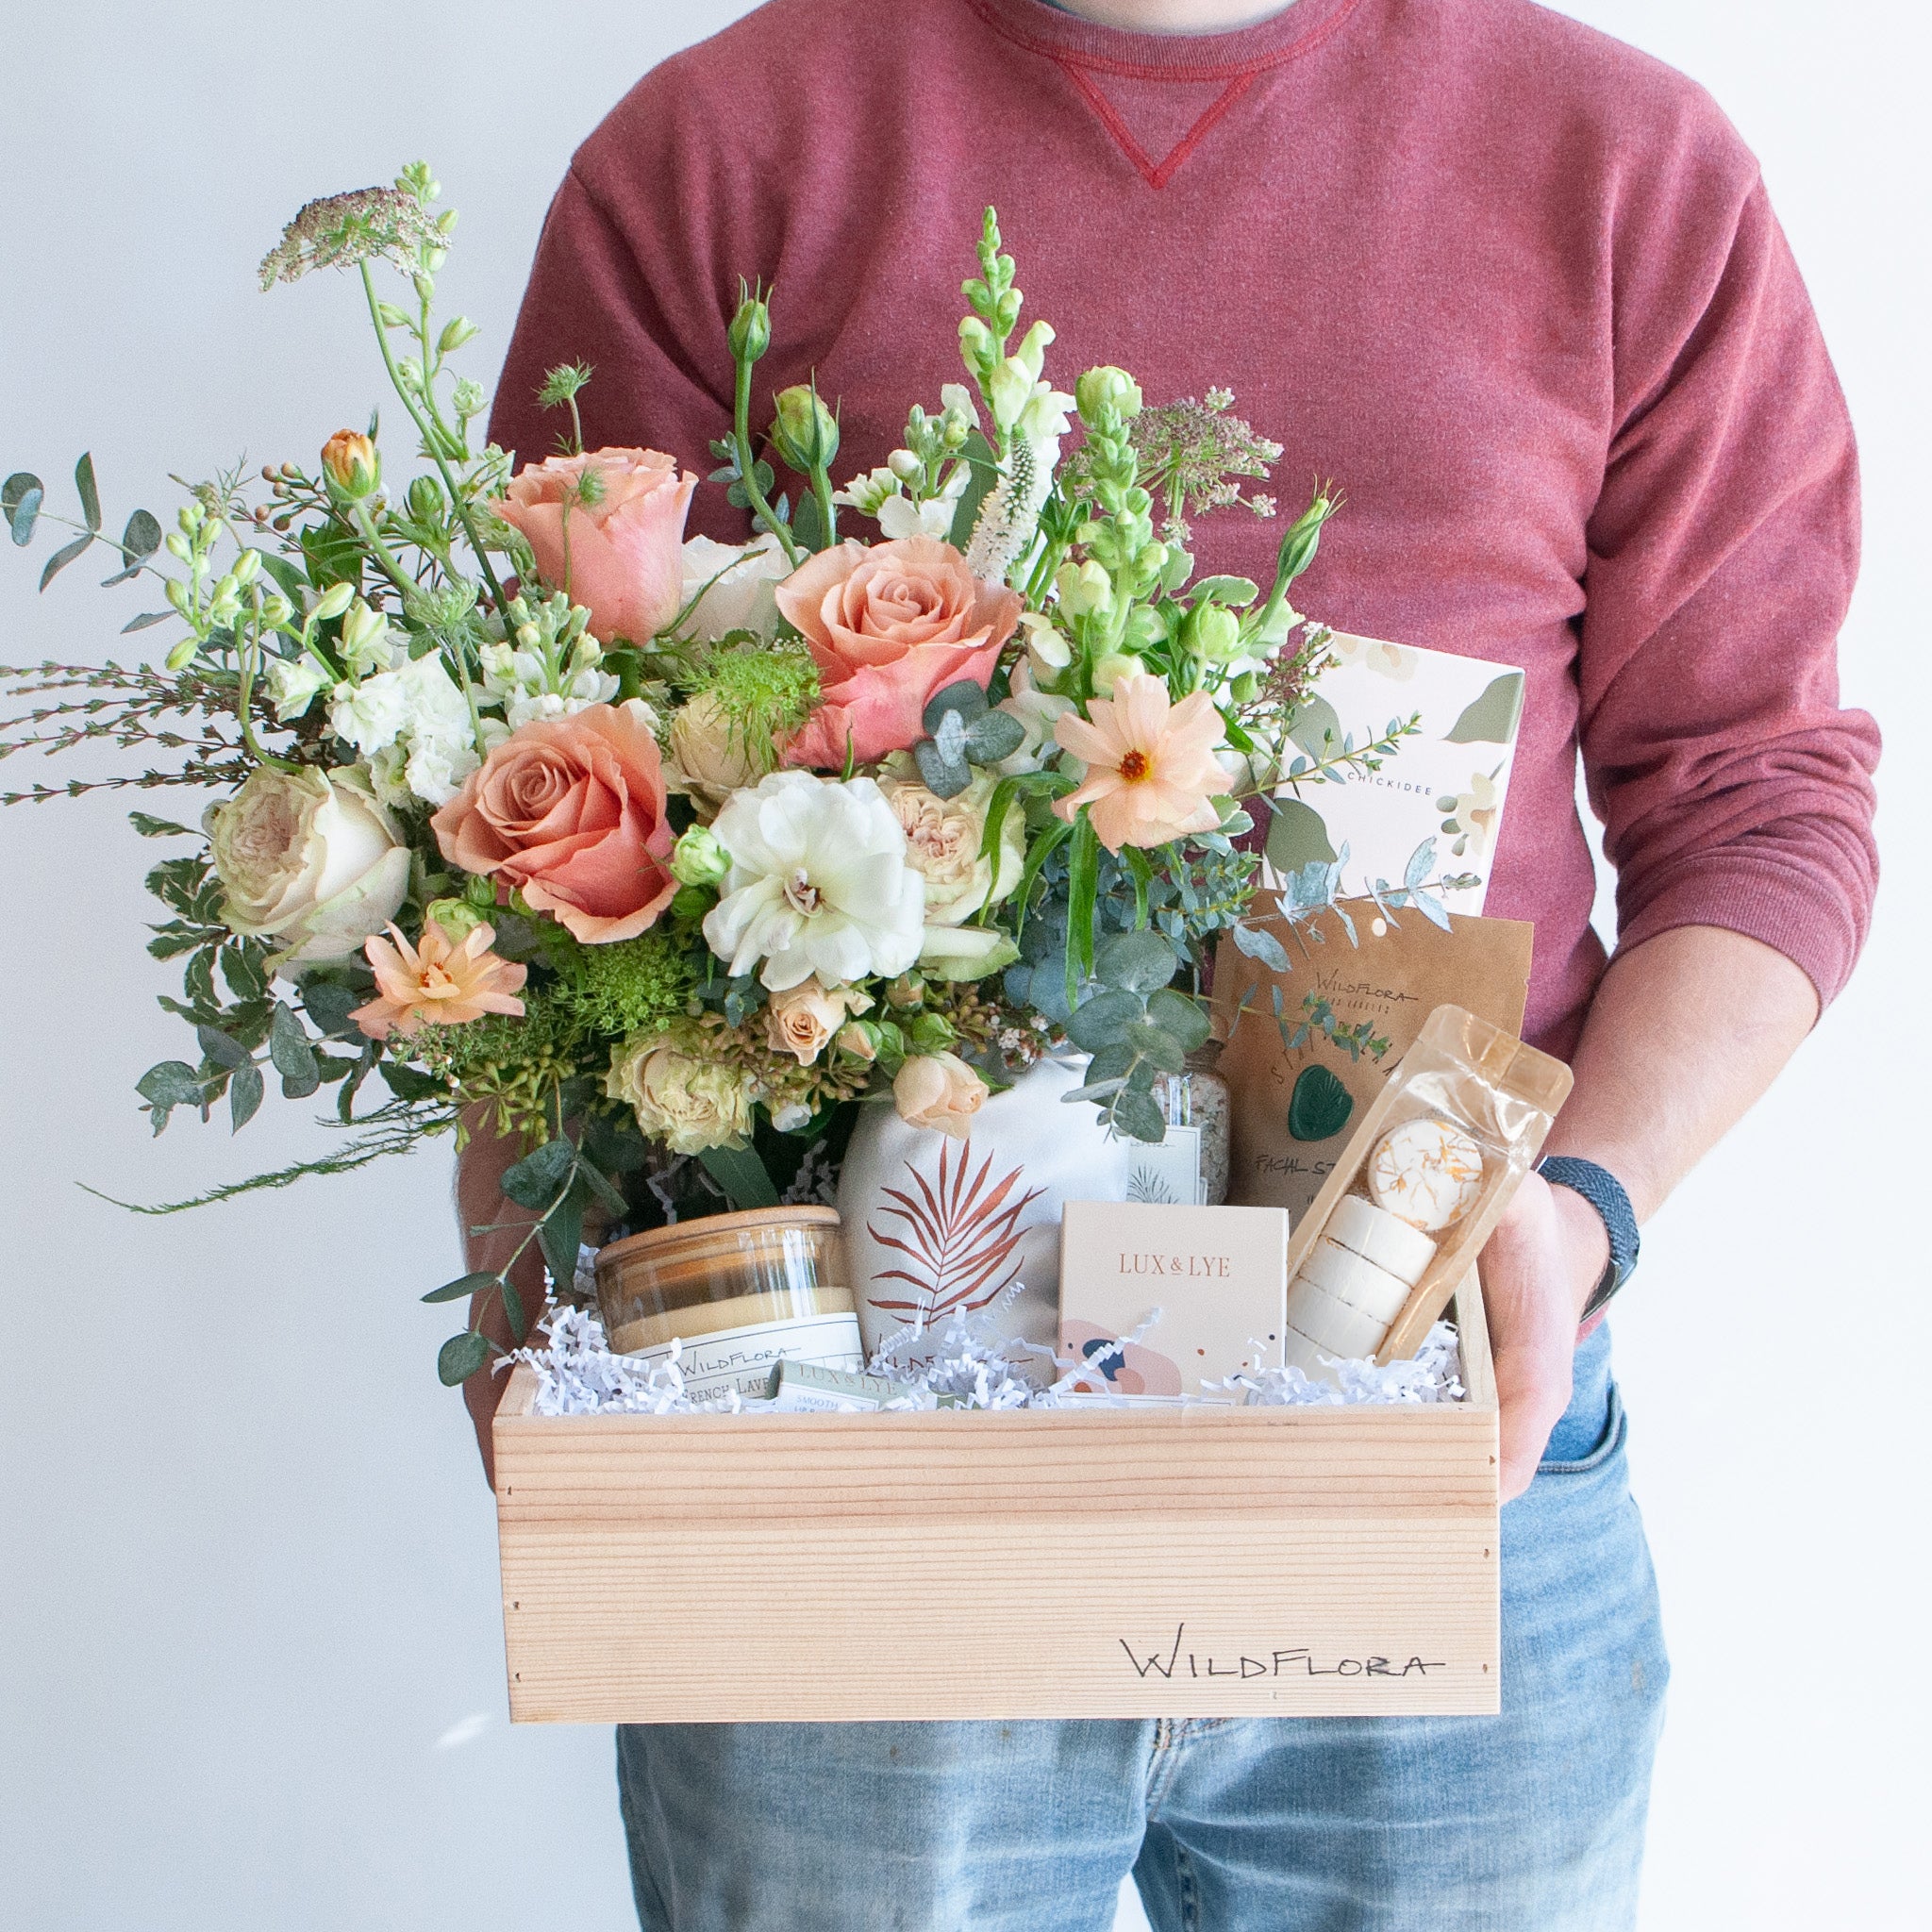 A man holding a wood gift box. In it is a white, chartreuse, peach, and salmon-colored flower arrangement, including rose, veronica, anemone, eucalyptus, queen anne's lace, and snapdragon. It also includes a candle, shower steamers, a lavender sachet, chapstick, bath salts, a facial steam, a reed diffuser and soap.